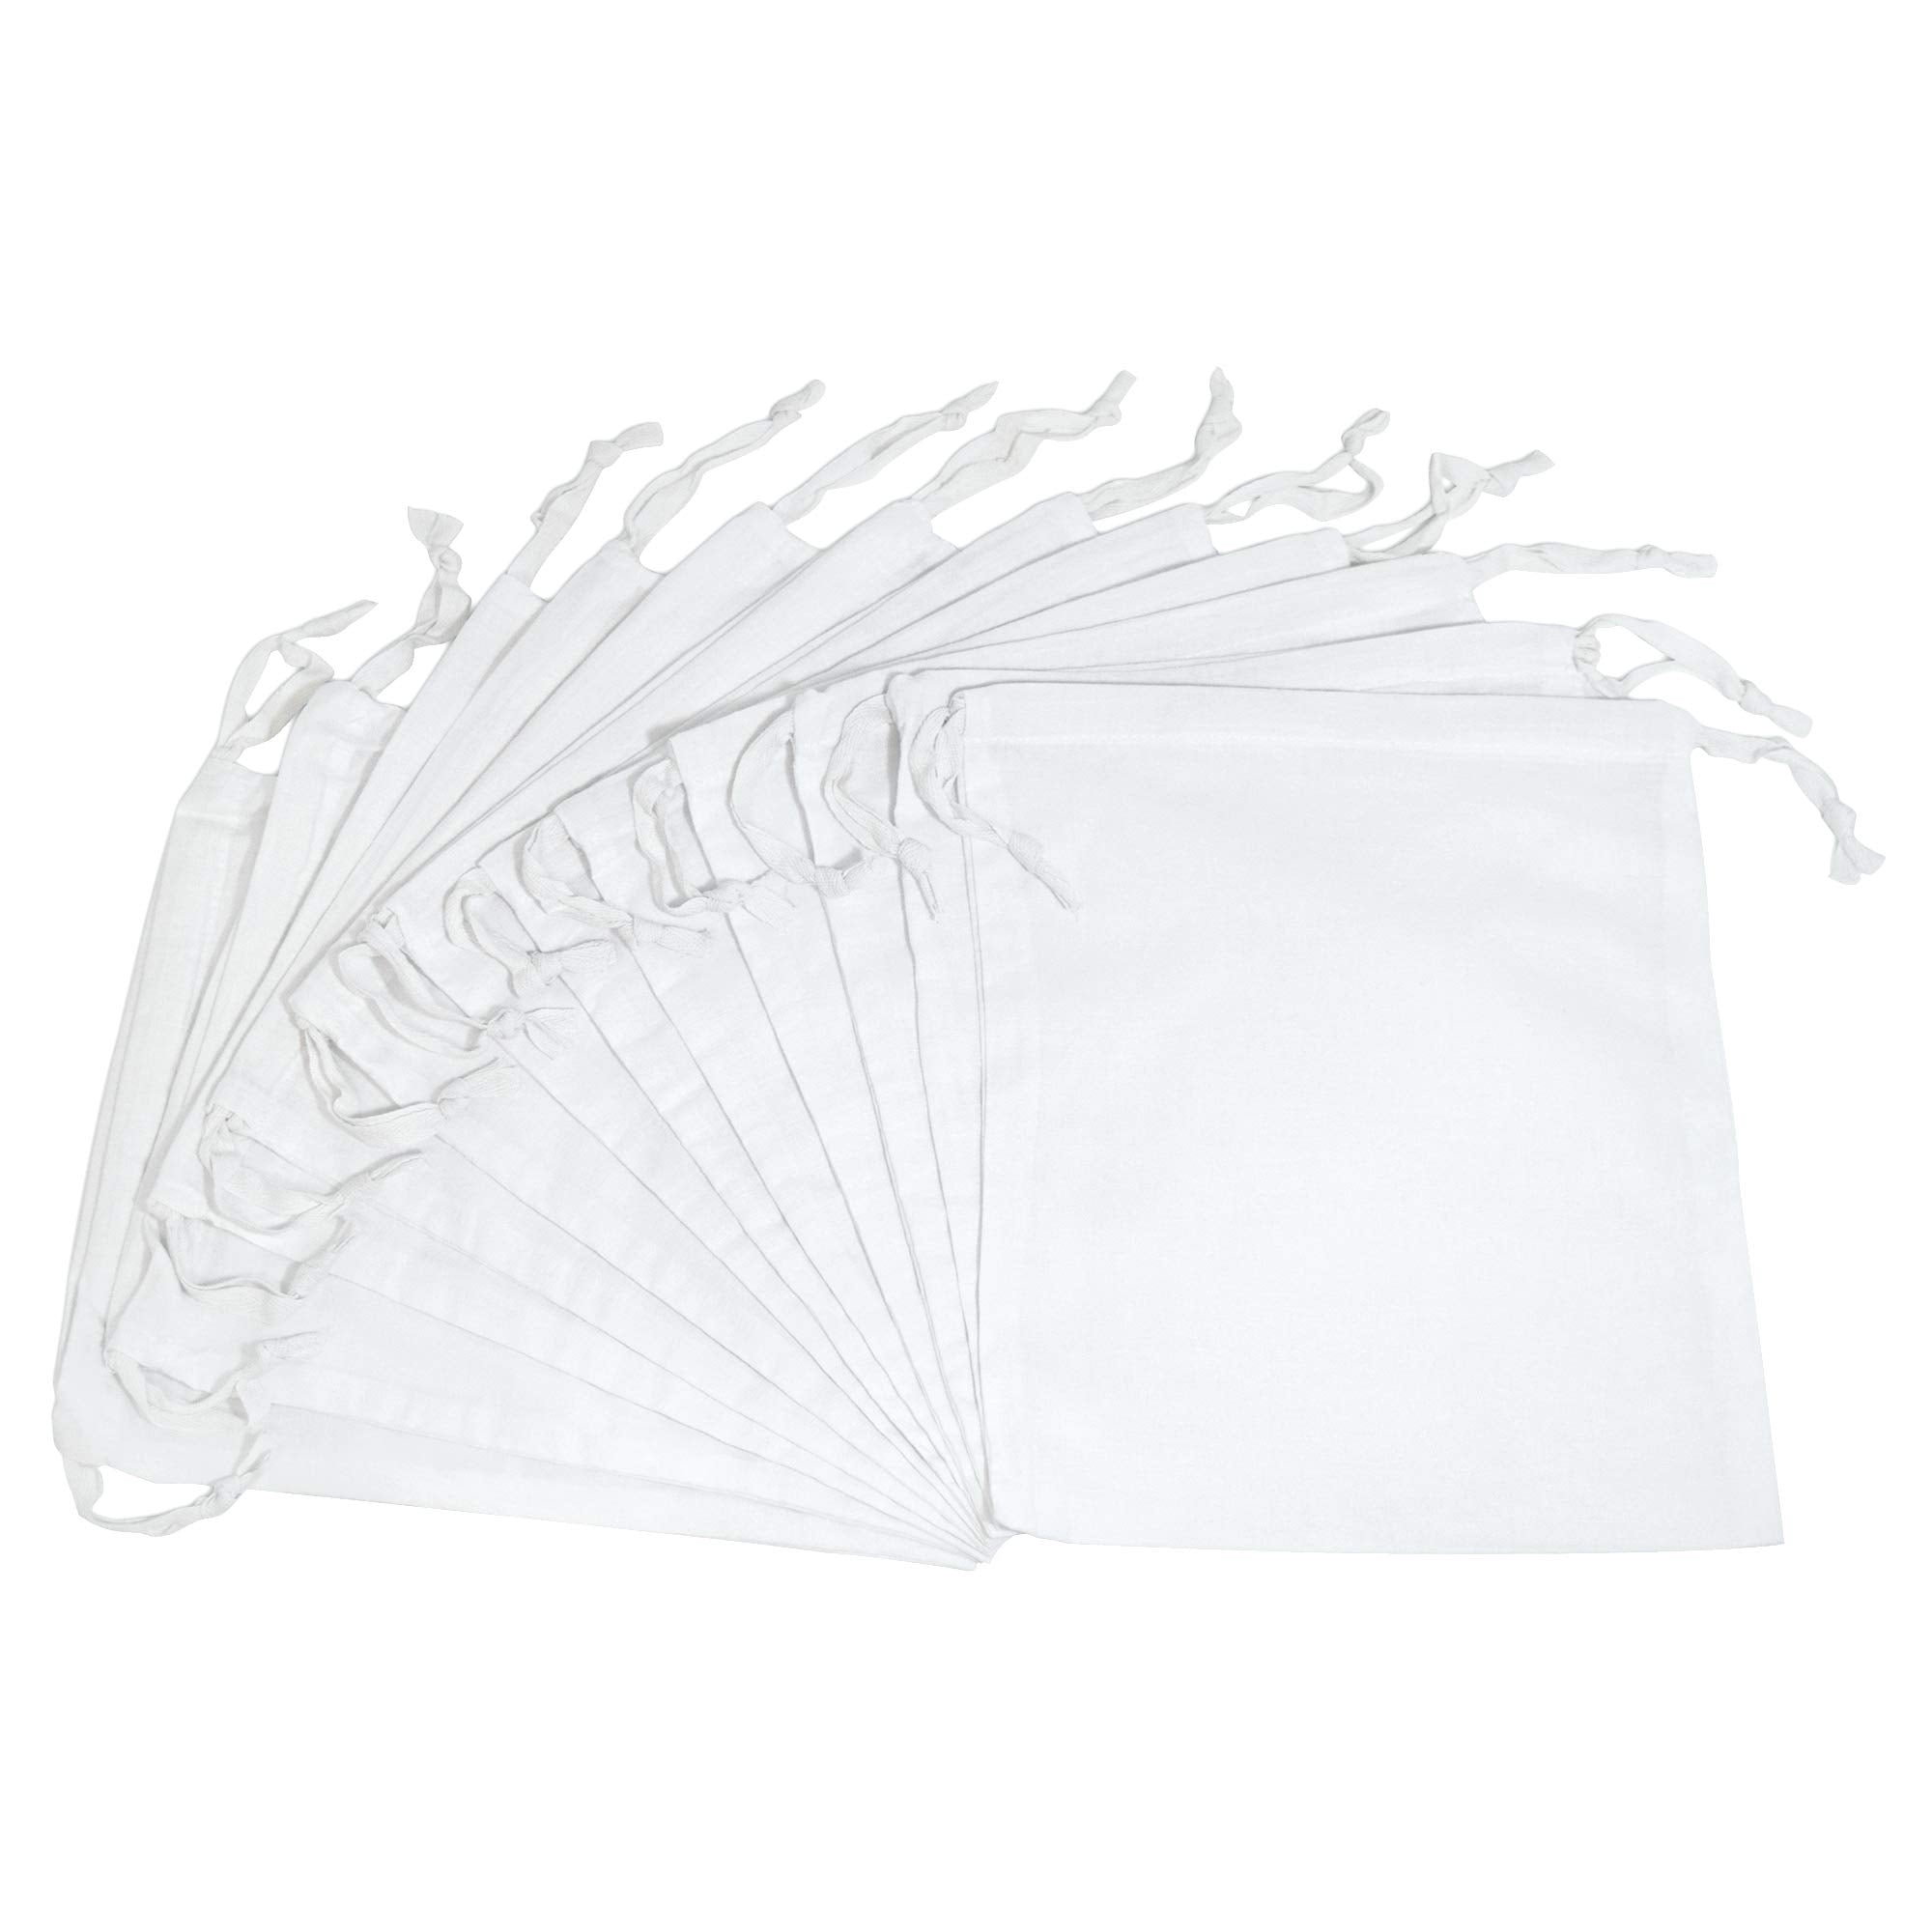 Prime Line Packaging 10x12 12 Pack White Drawstring Bags, Medium Canvas Drawstring, Muslin Cotton Cloth Pouch for Jewelry, Gifts, Favors Presents Bulk  - Acceptable